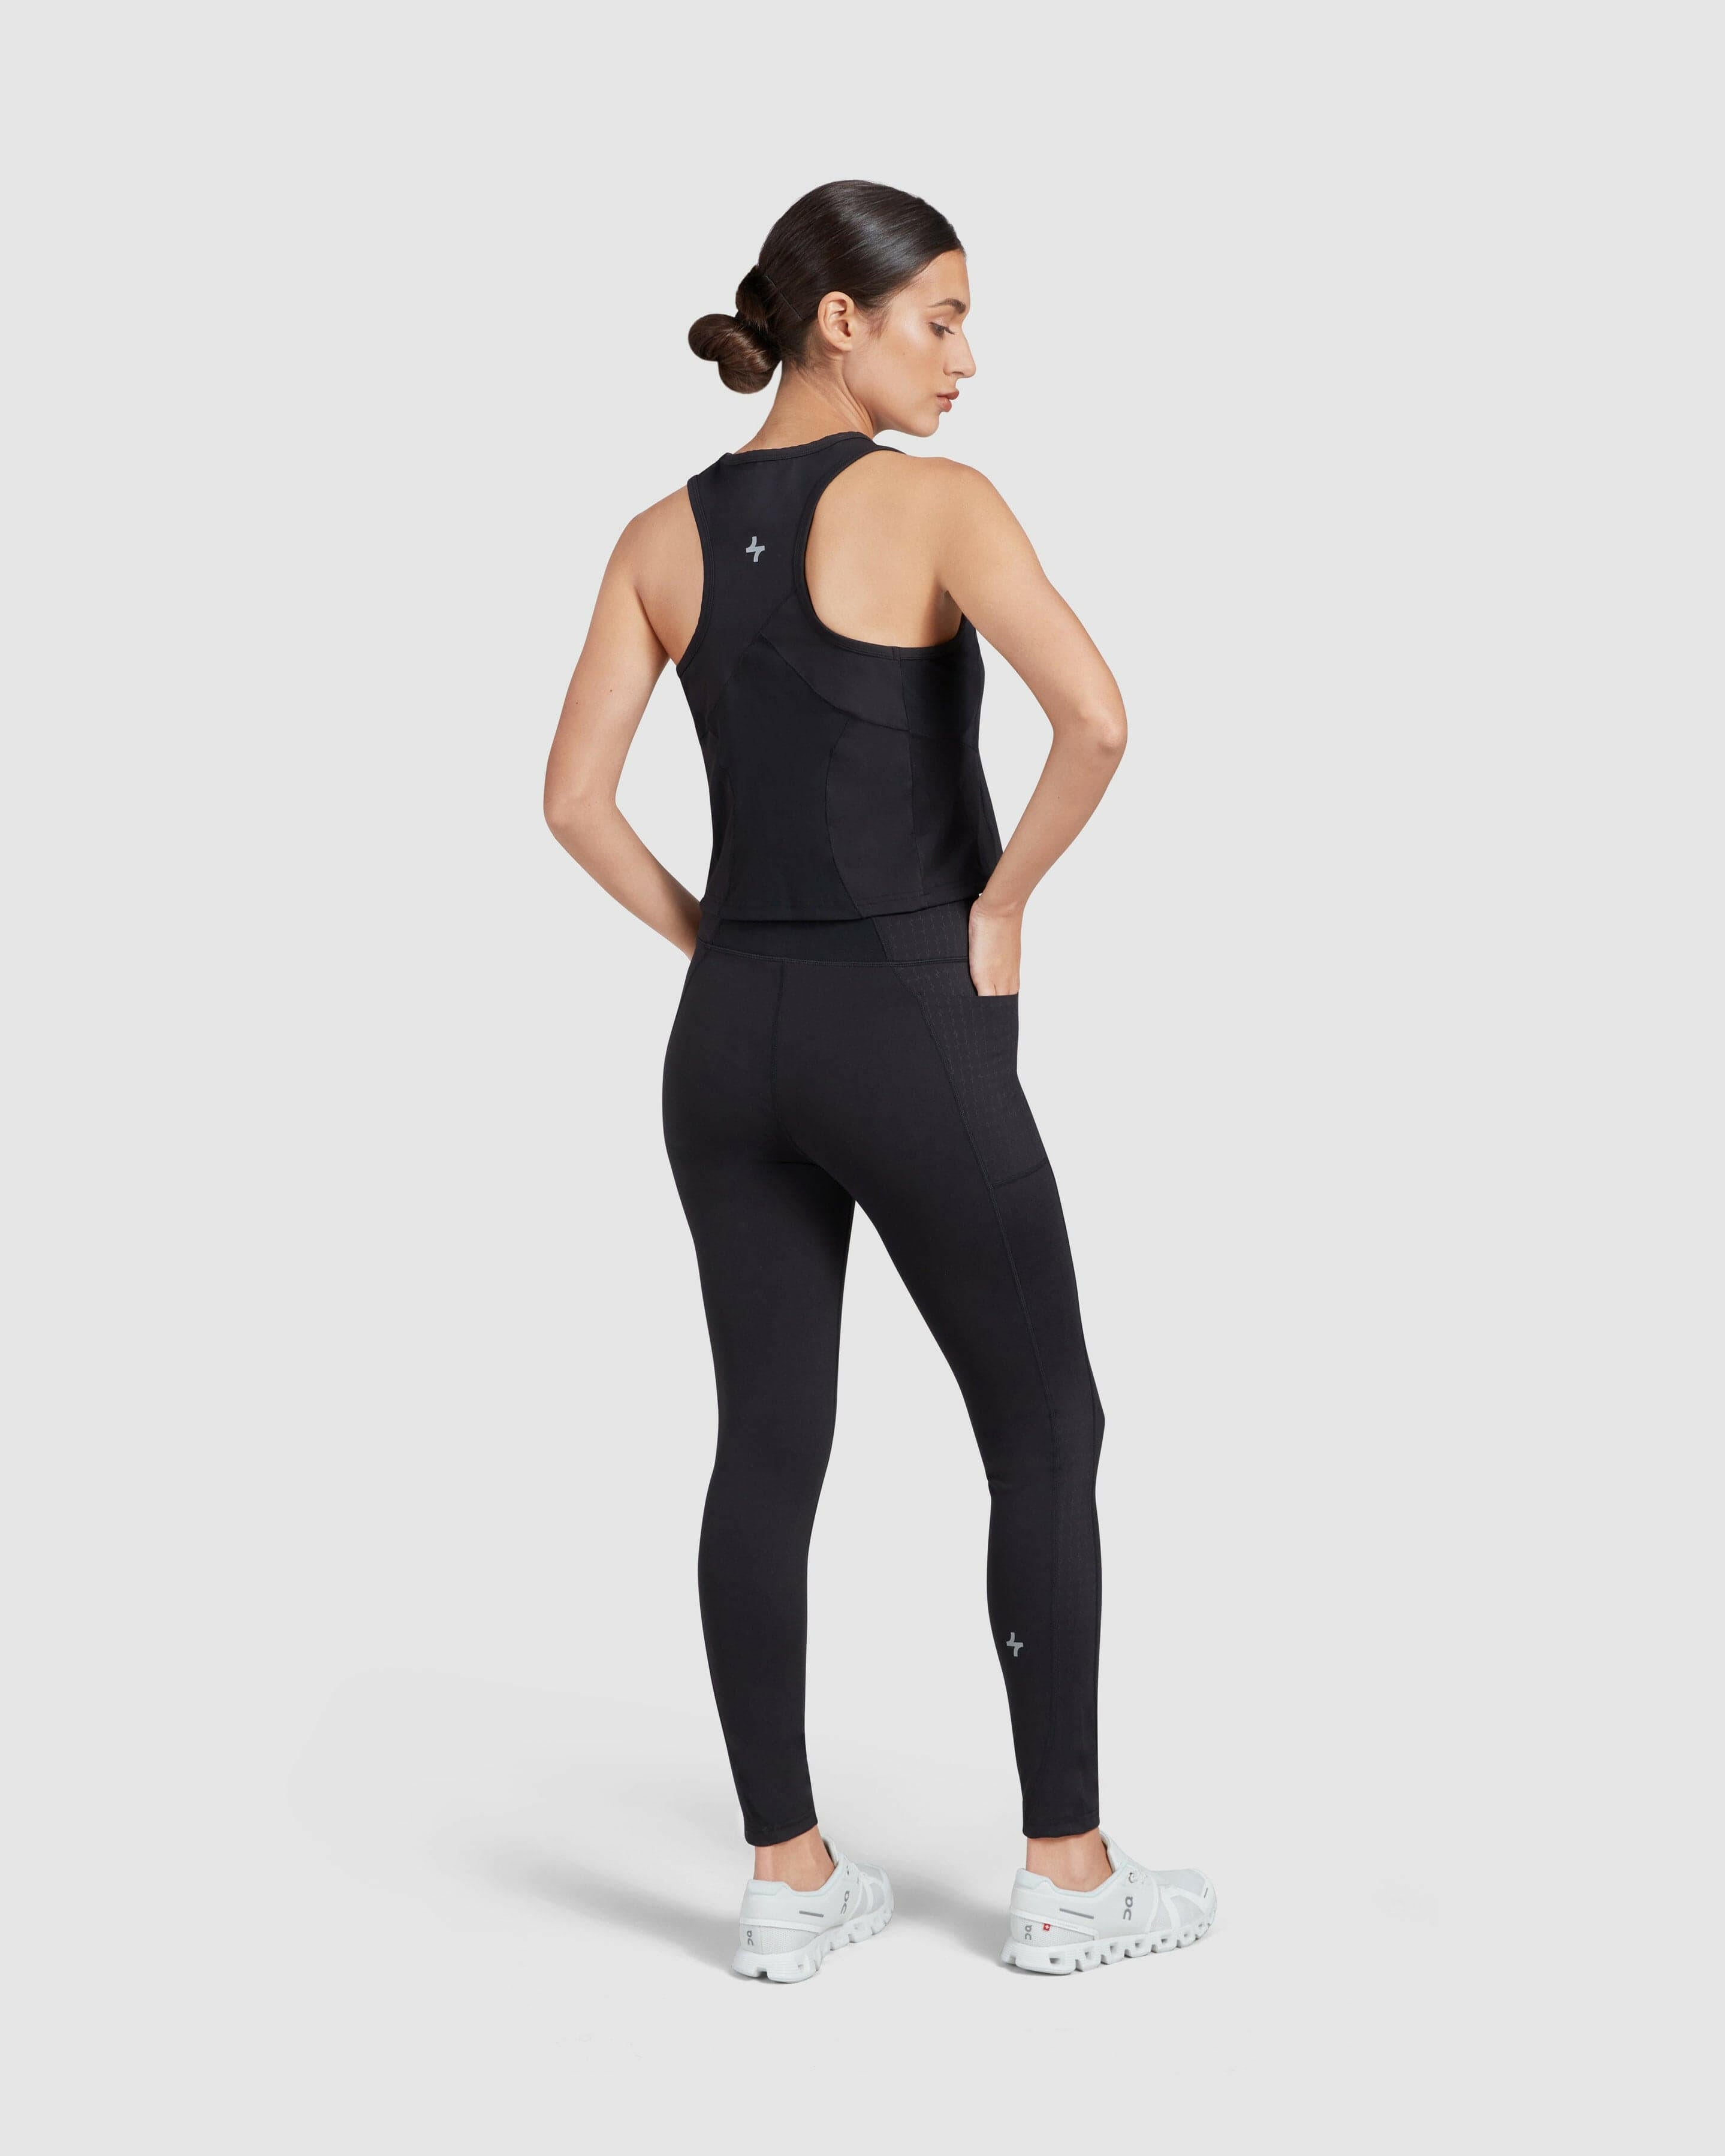  Model in Modest athletic wear posing with her back to the camera, showcasing the fit and design of a better-fitting black tank top and LADINA LEGGINGS set against a white background.